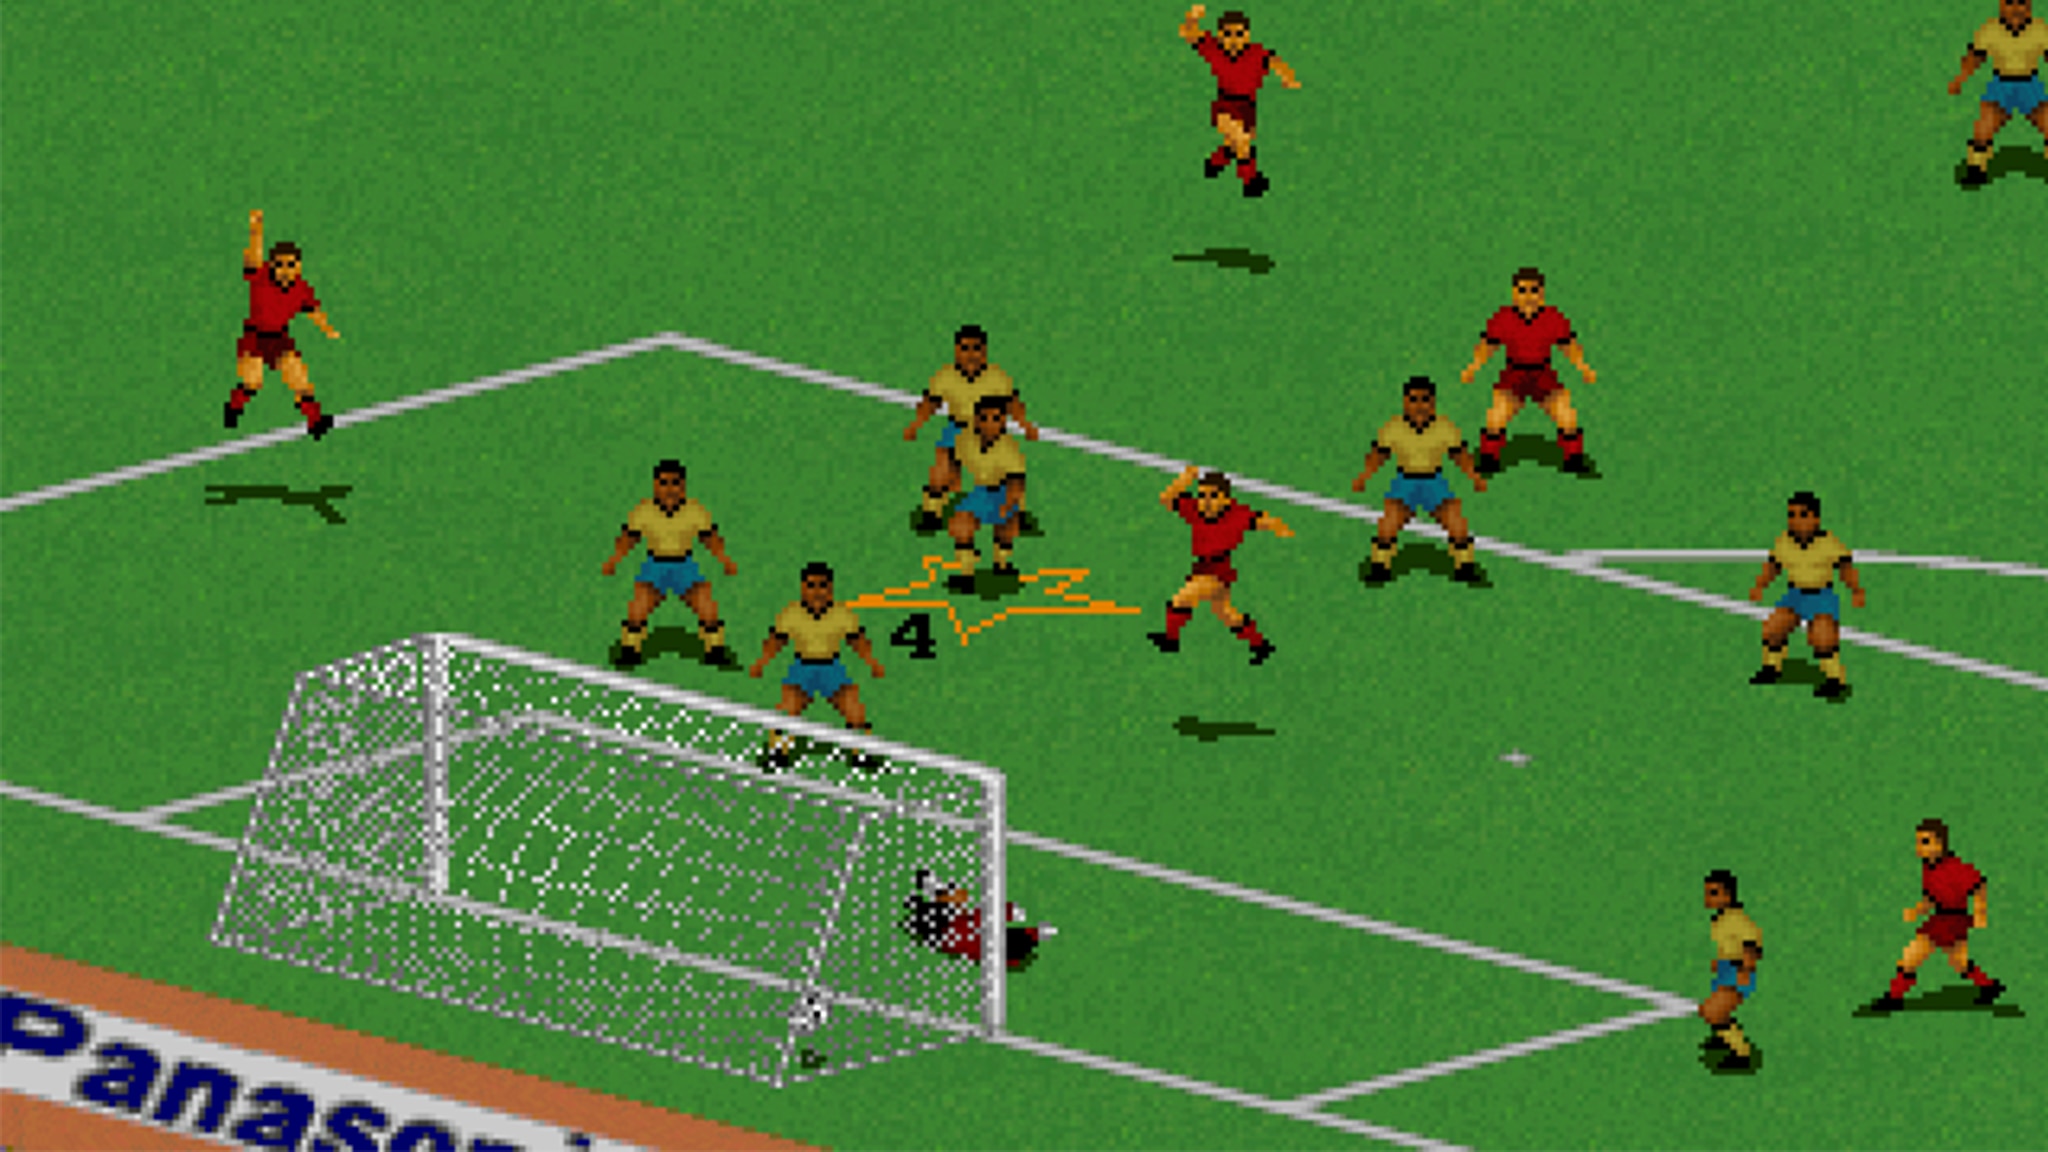 FIFA International Soccer, The Game That Launched A Billion Dollar